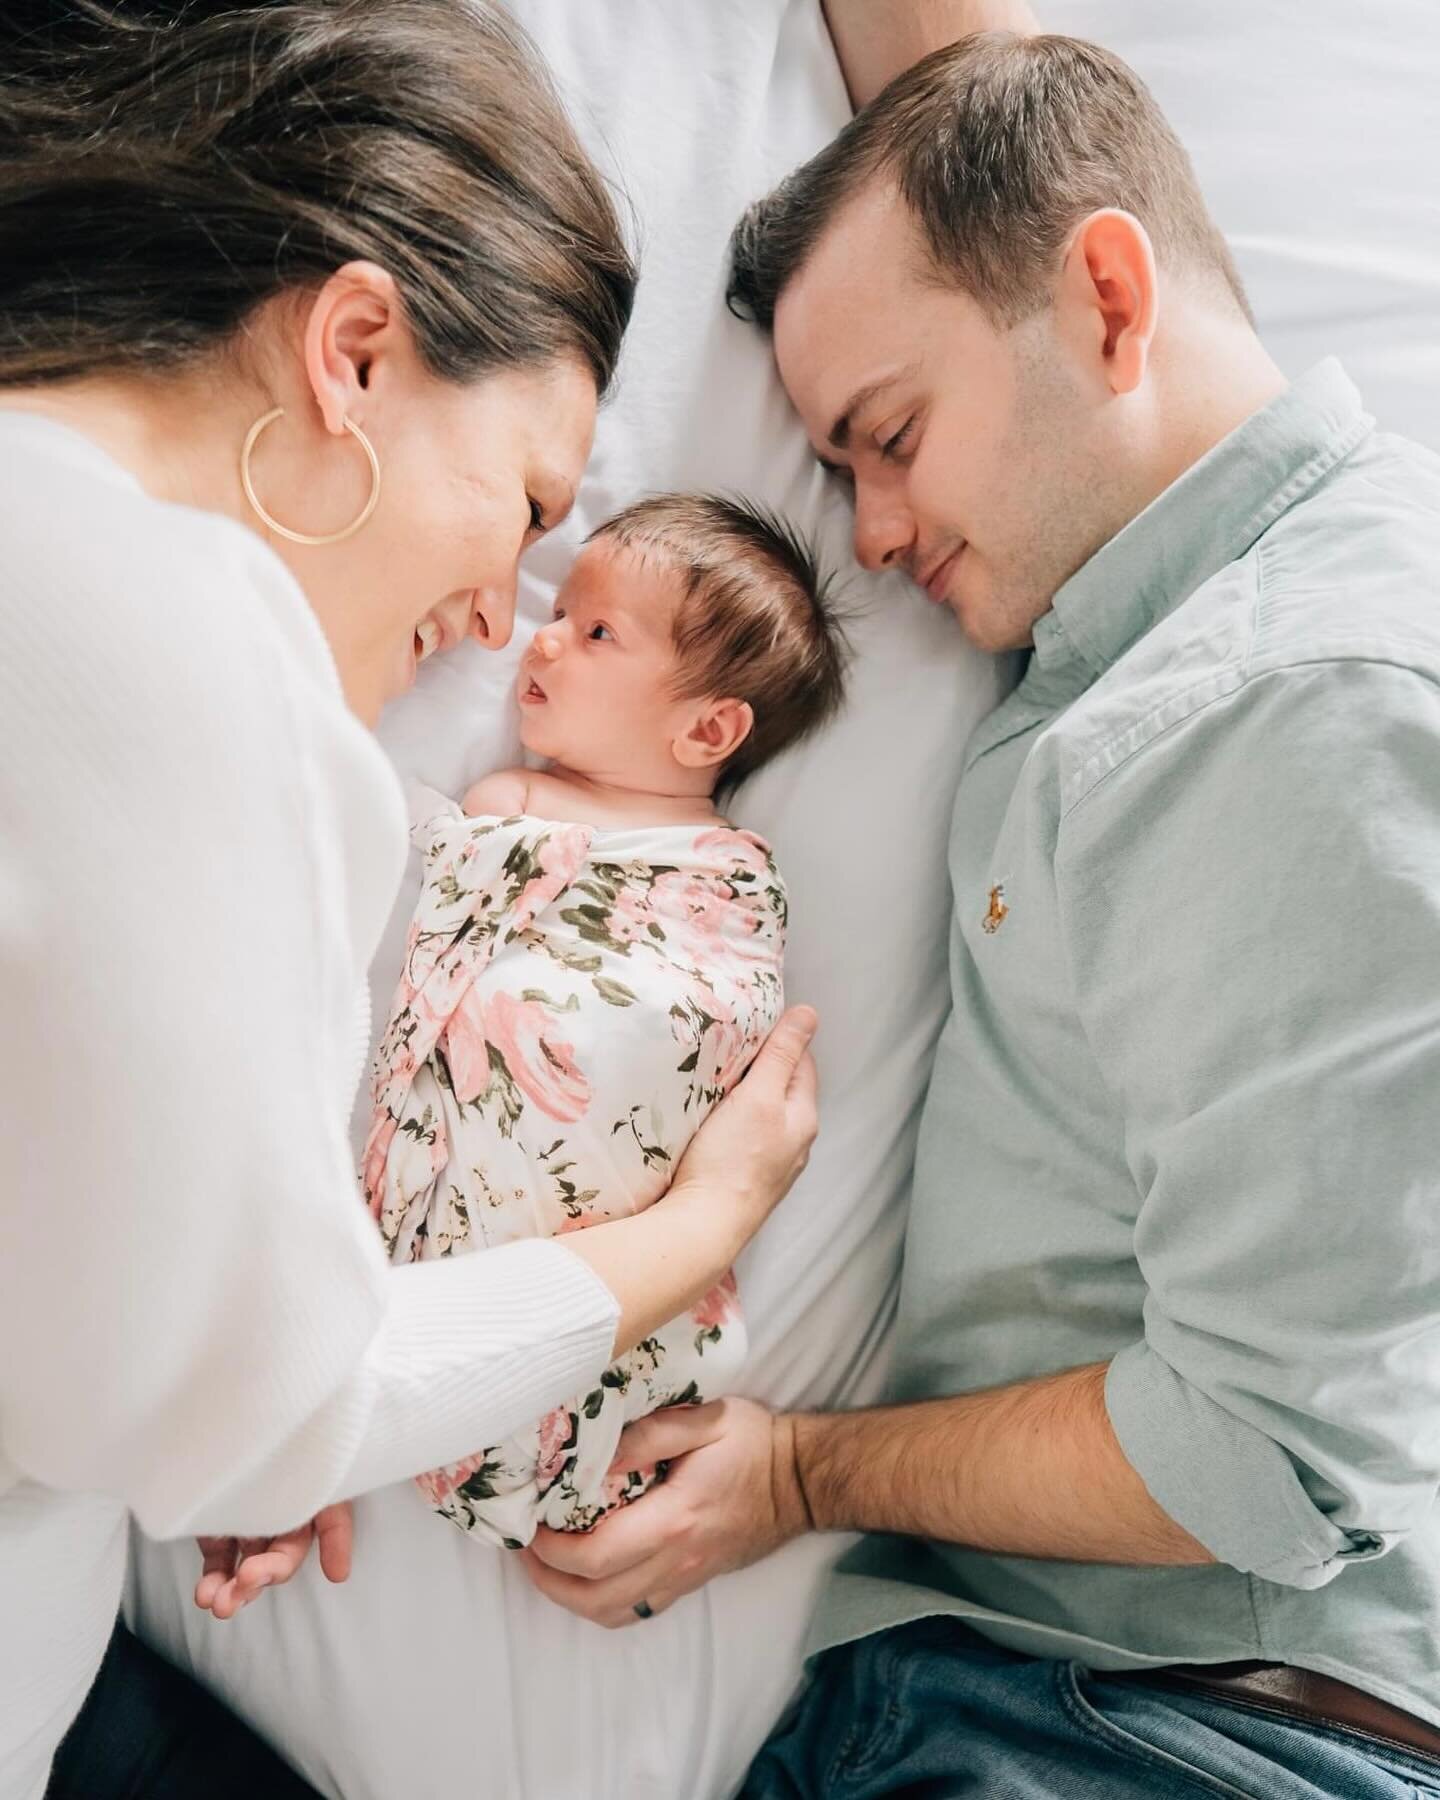 In home lifestyle newborn sessions will forever be one of my favorite things that I get to capture as a family photographer. As a mama myself, I know just how precious those first few weeks with a newborn truly are. There&rsquo;s nothing like the fee